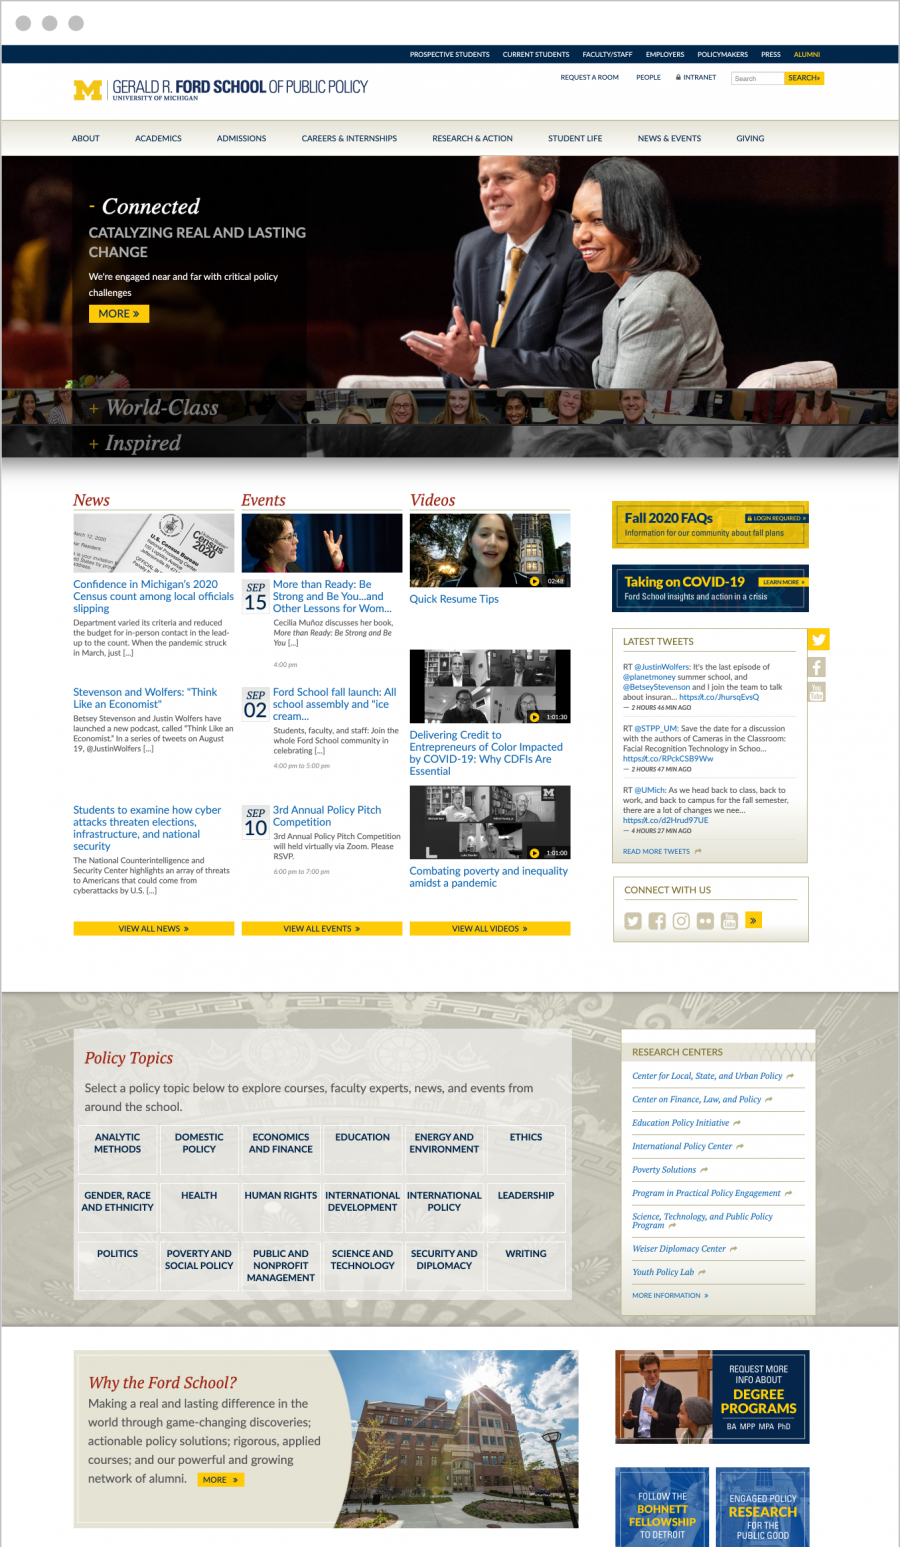 "Before" image of the old Ford School homepage